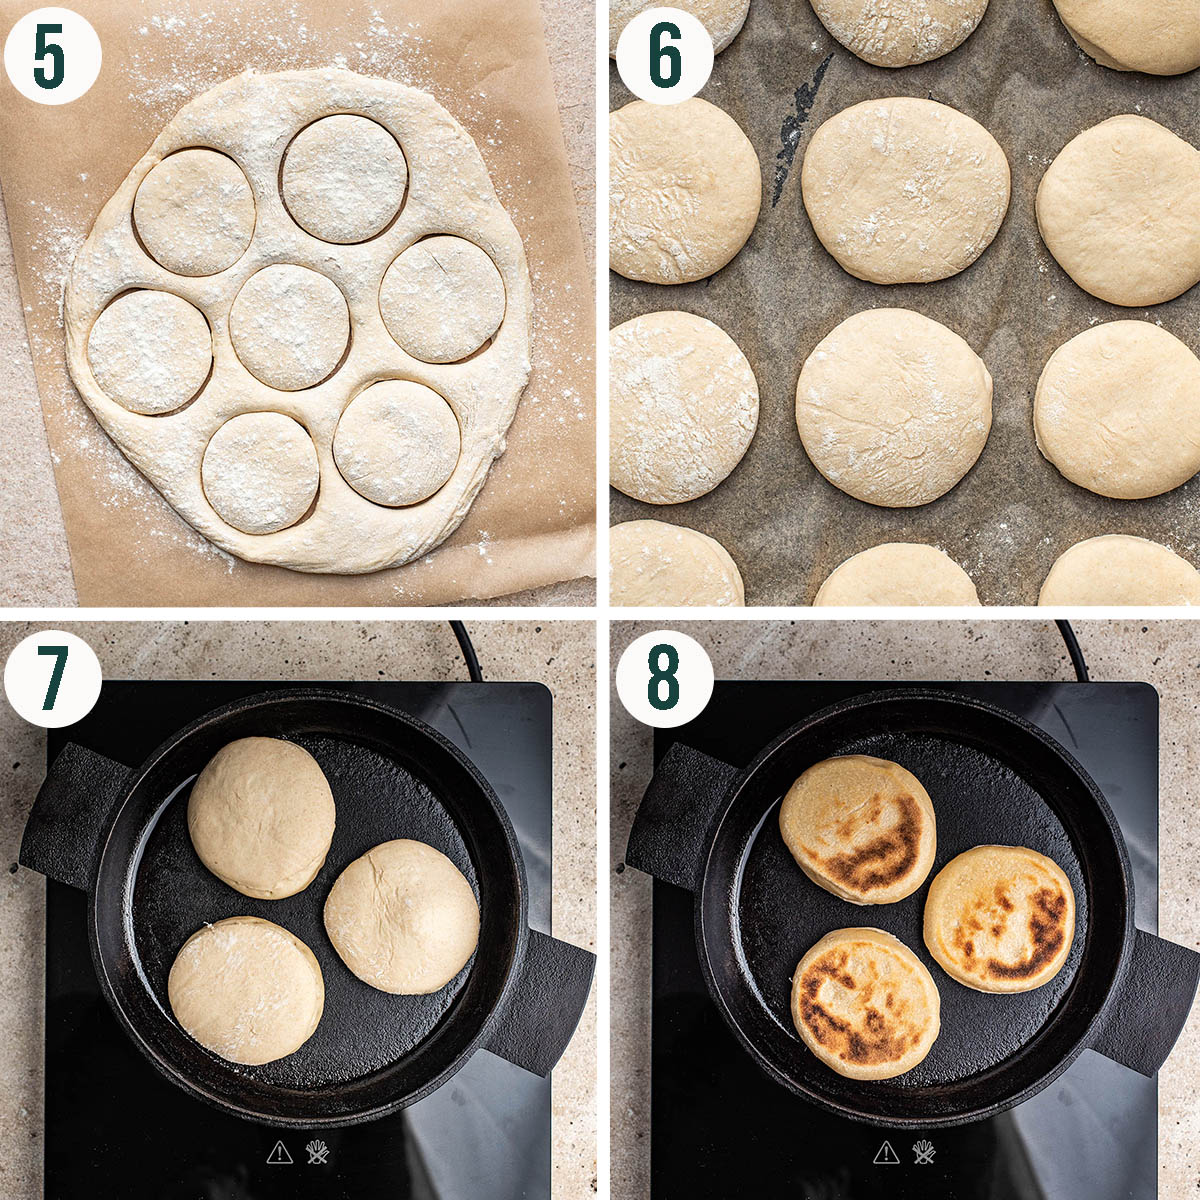 English muffins steps 5 to 8, cutting and frying.